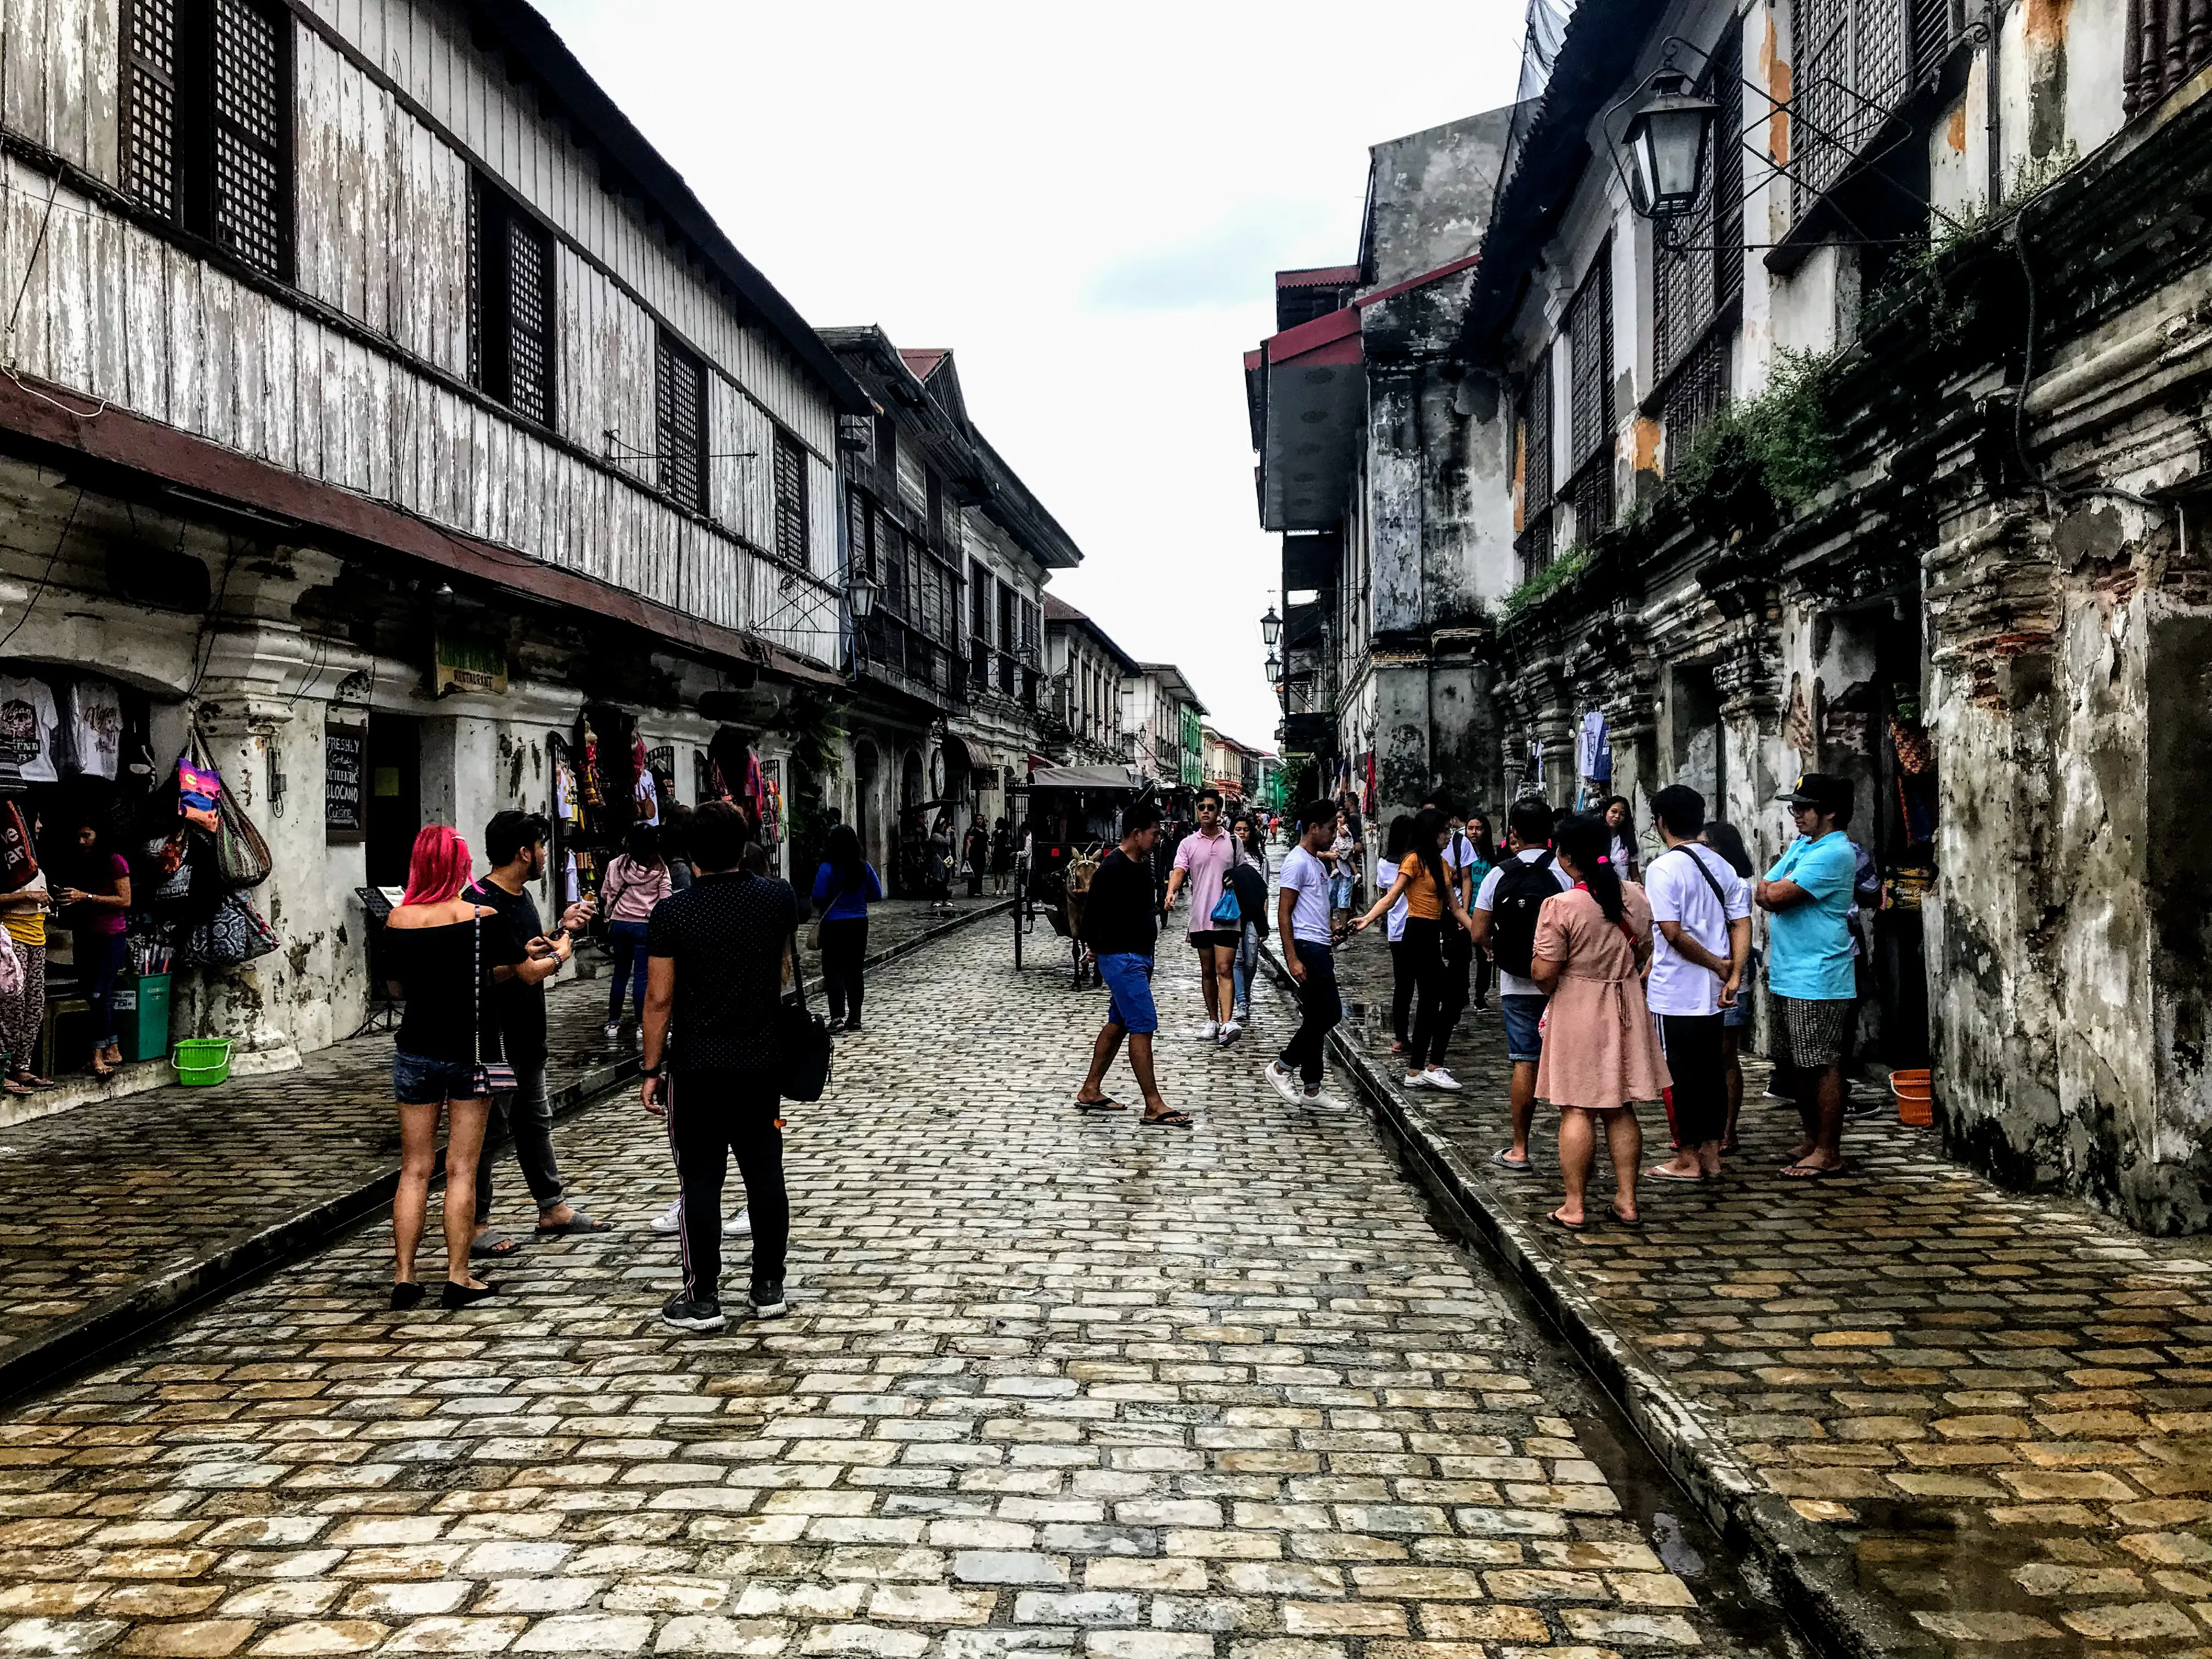 How to get to and enjoy the UNESCO town of Vigan in Philippines